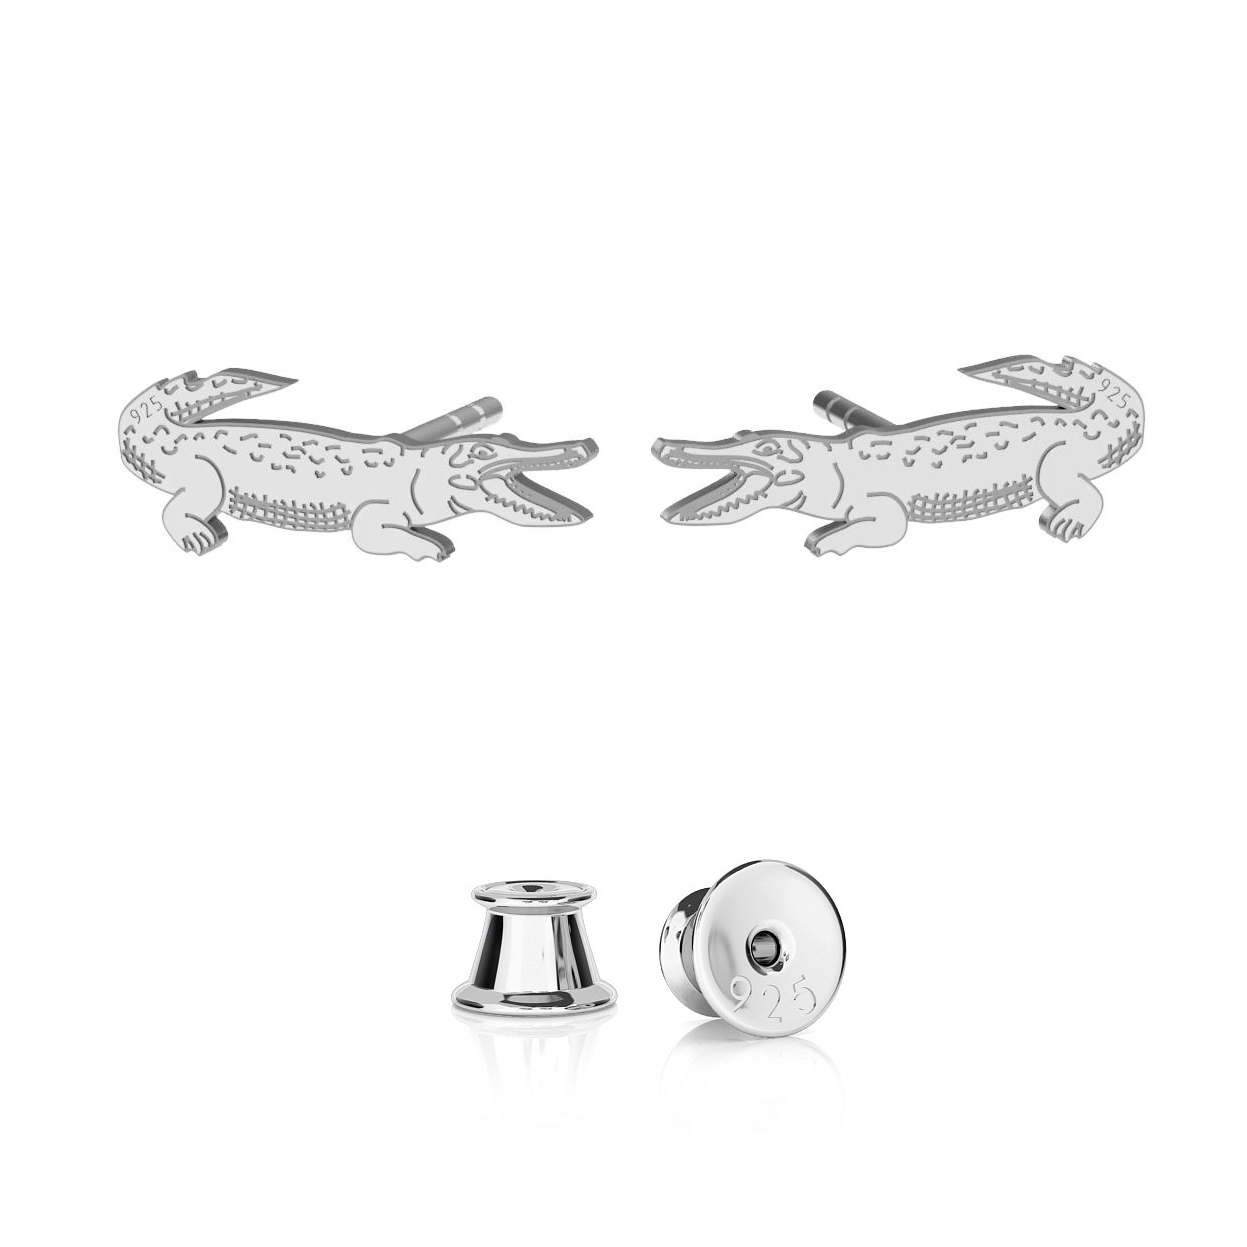 DOLPHINS EARRING STERLING SILVER 925